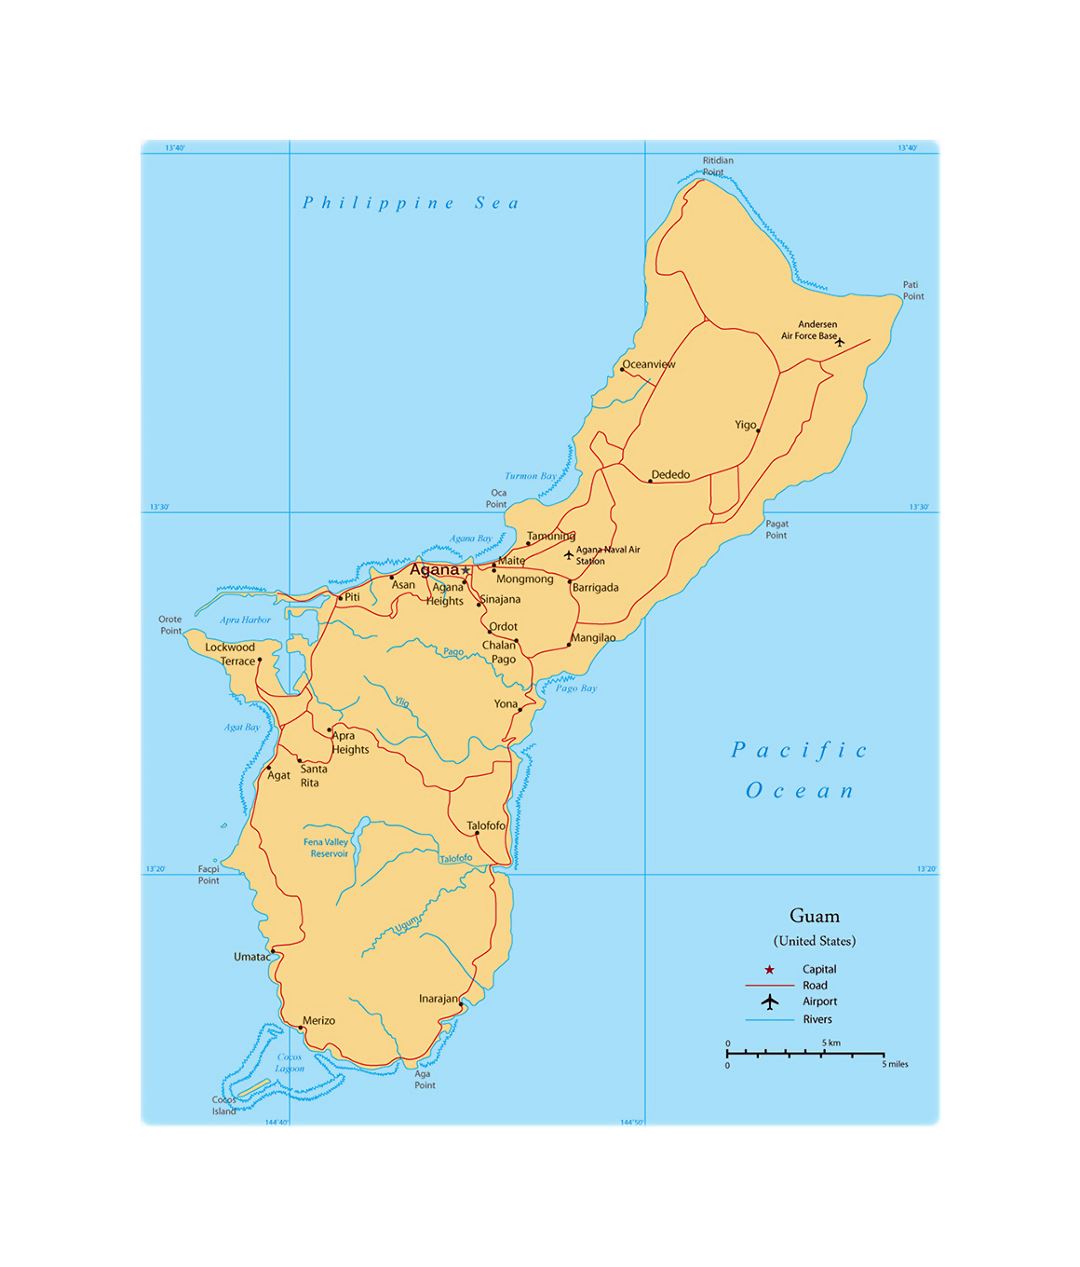 Detailed political map of Guam with roads, cities and airports